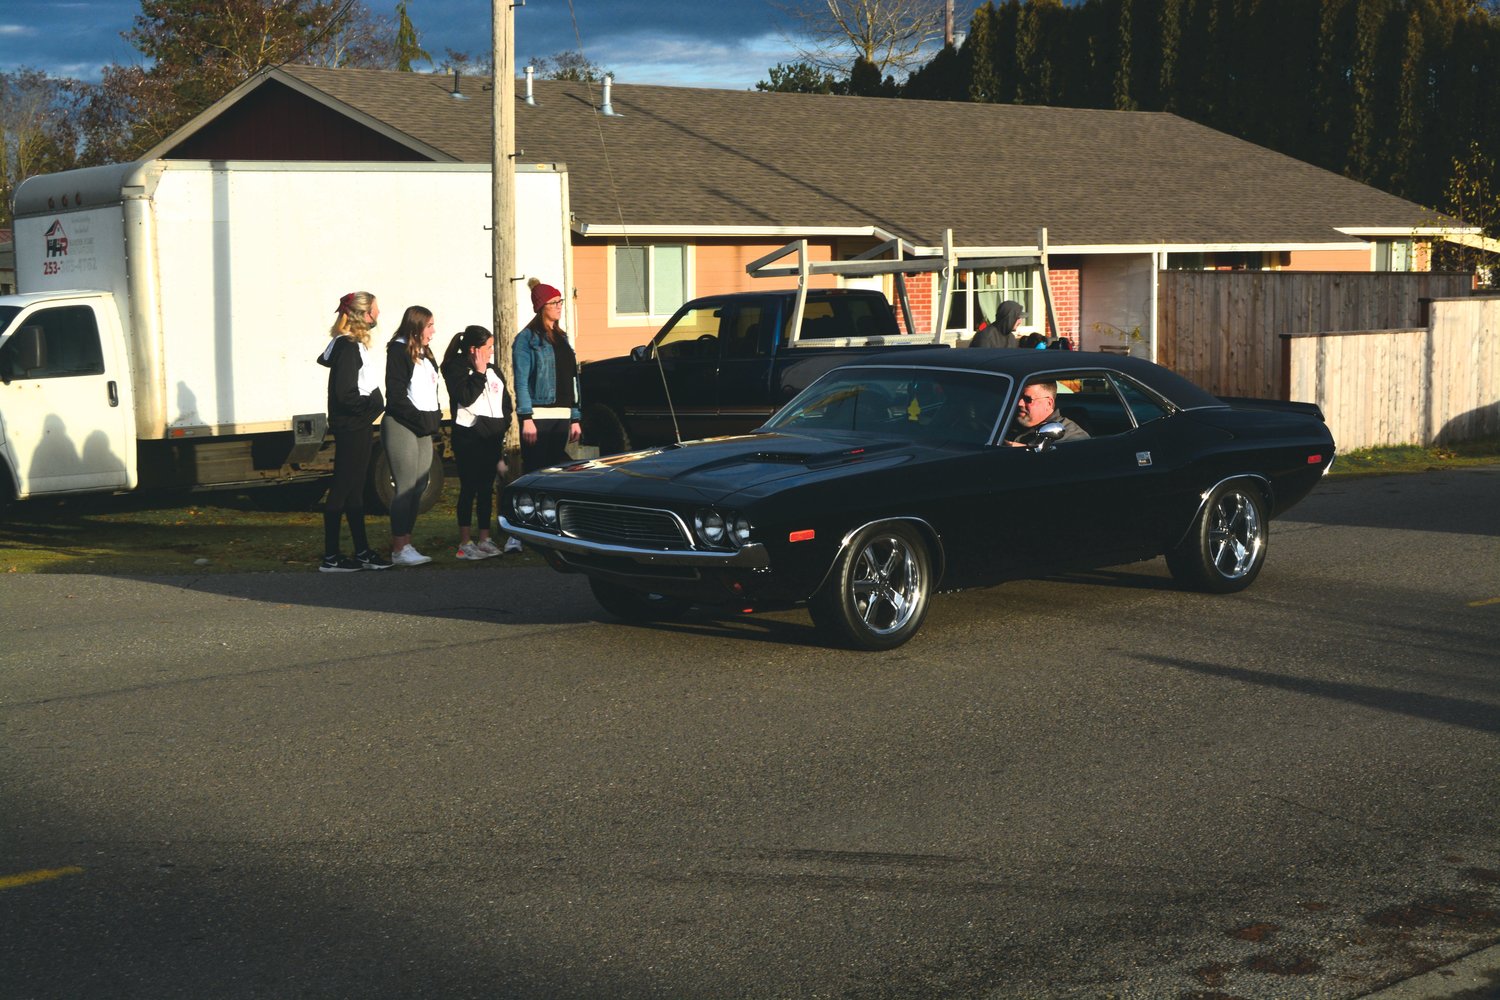 A man drives his car outside of Jeren Pollock’s home on Jan. 8 during a car parade.